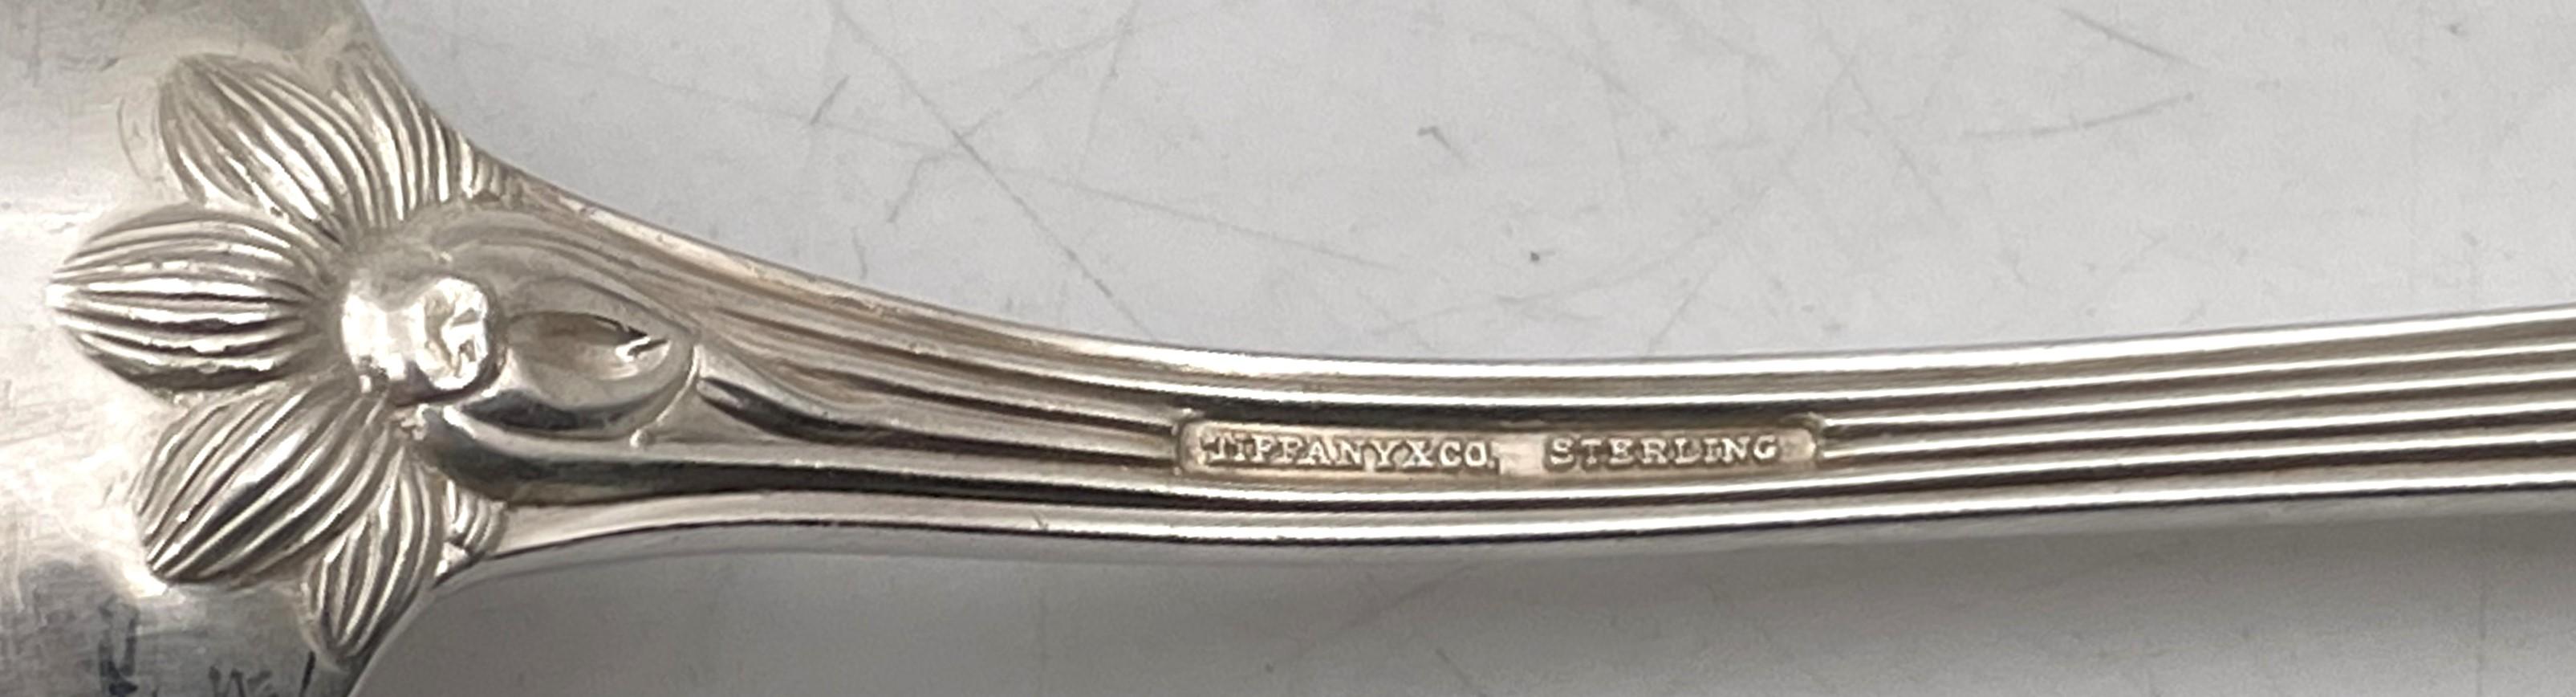 Tiffany & Co. Sterling Silver Tablespoon in Audubon Pattern In Good Condition For Sale In New York, NY